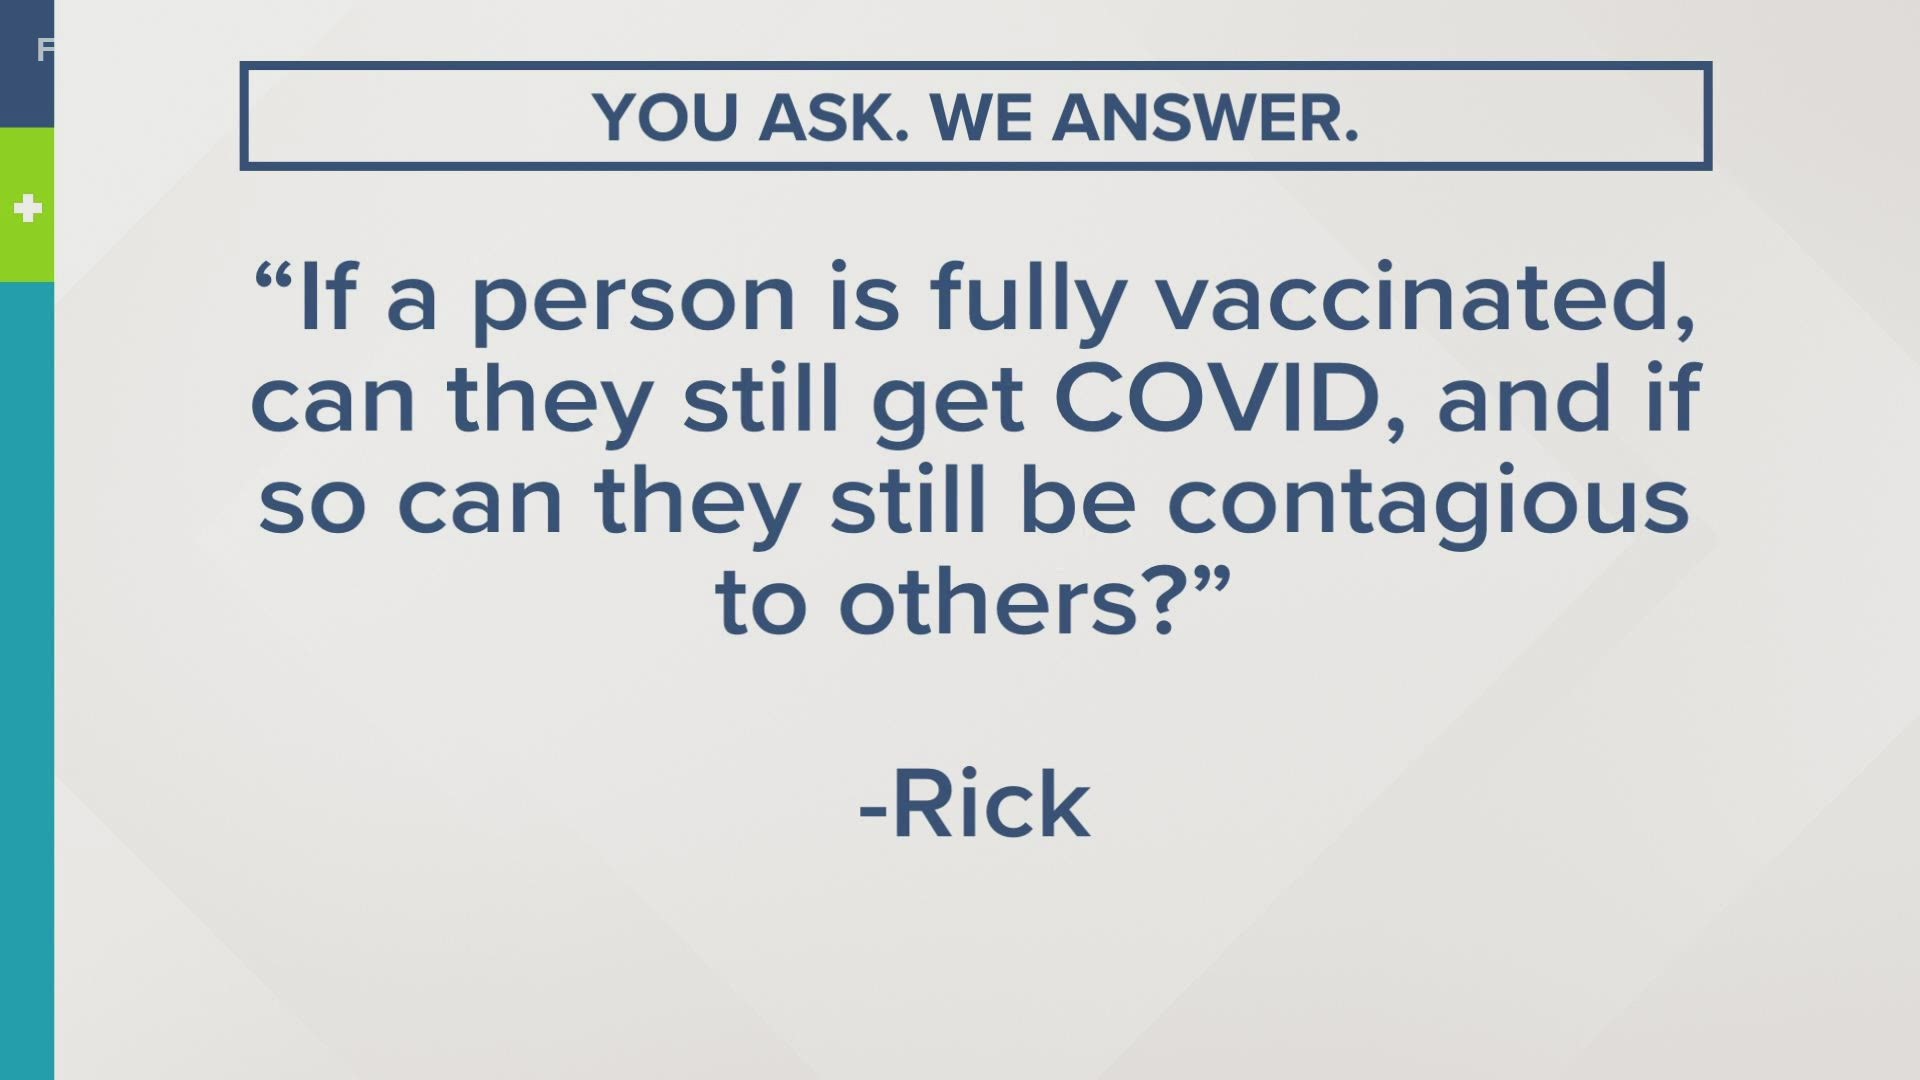 If you have a question about COVID-19 or the vaccine, email SHARE61@fox61.com or send a text to 860-527-6161.